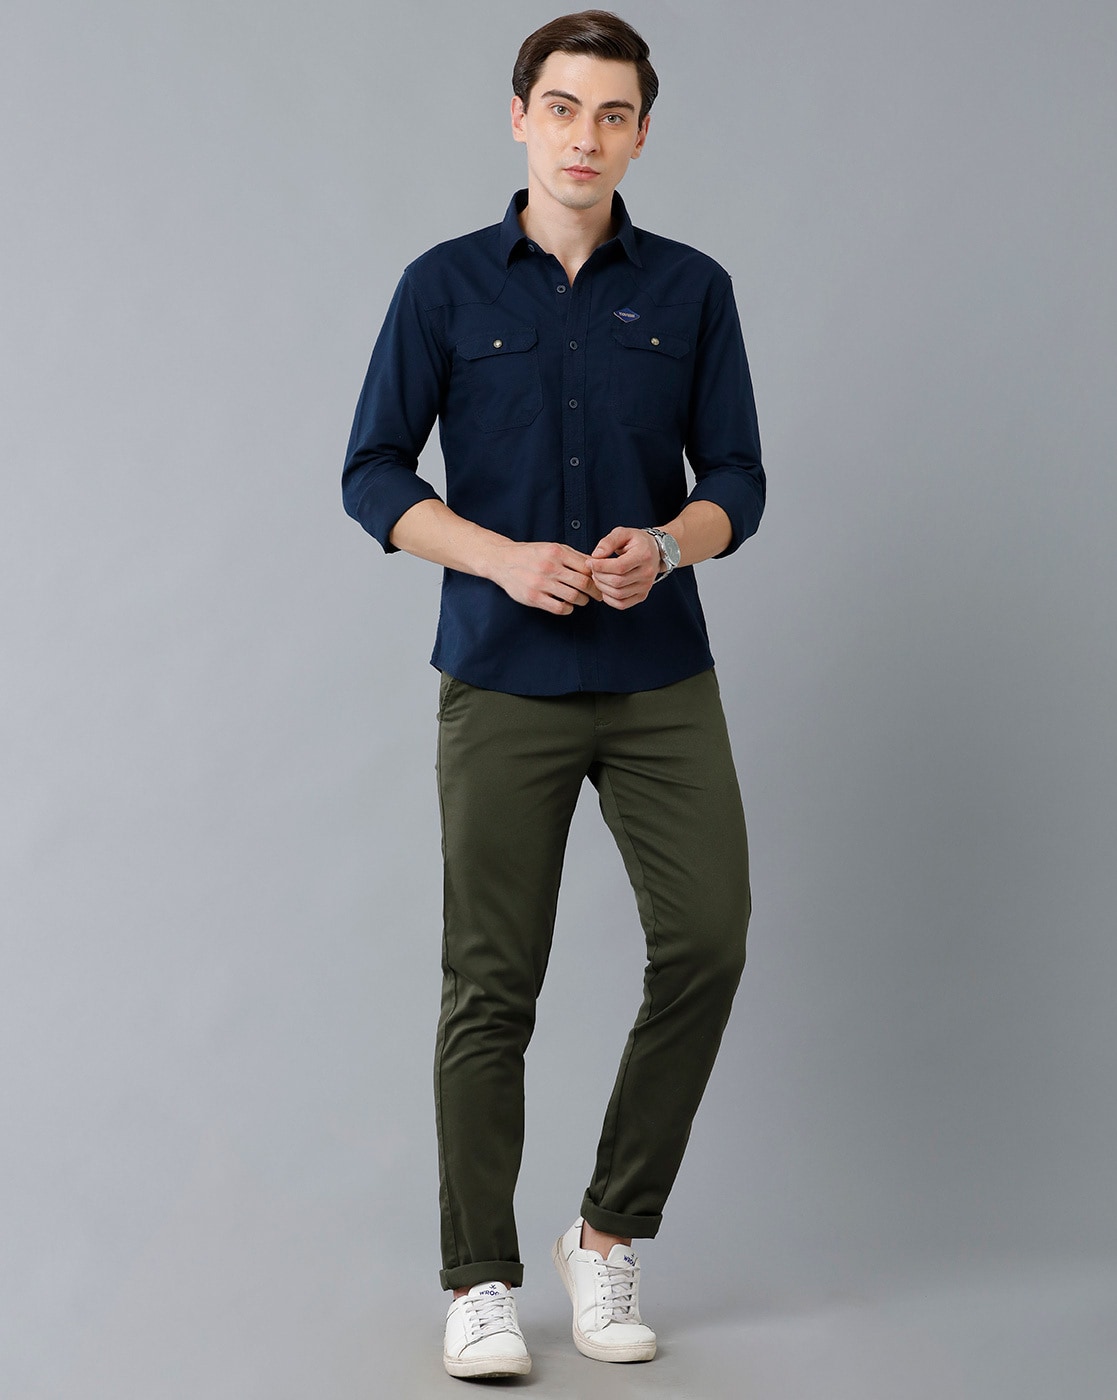 Dark Green Pants with Light Blue Shirt Casual Hot Weather Outfits For Men  (3 ideas & outfits) | Lookastic